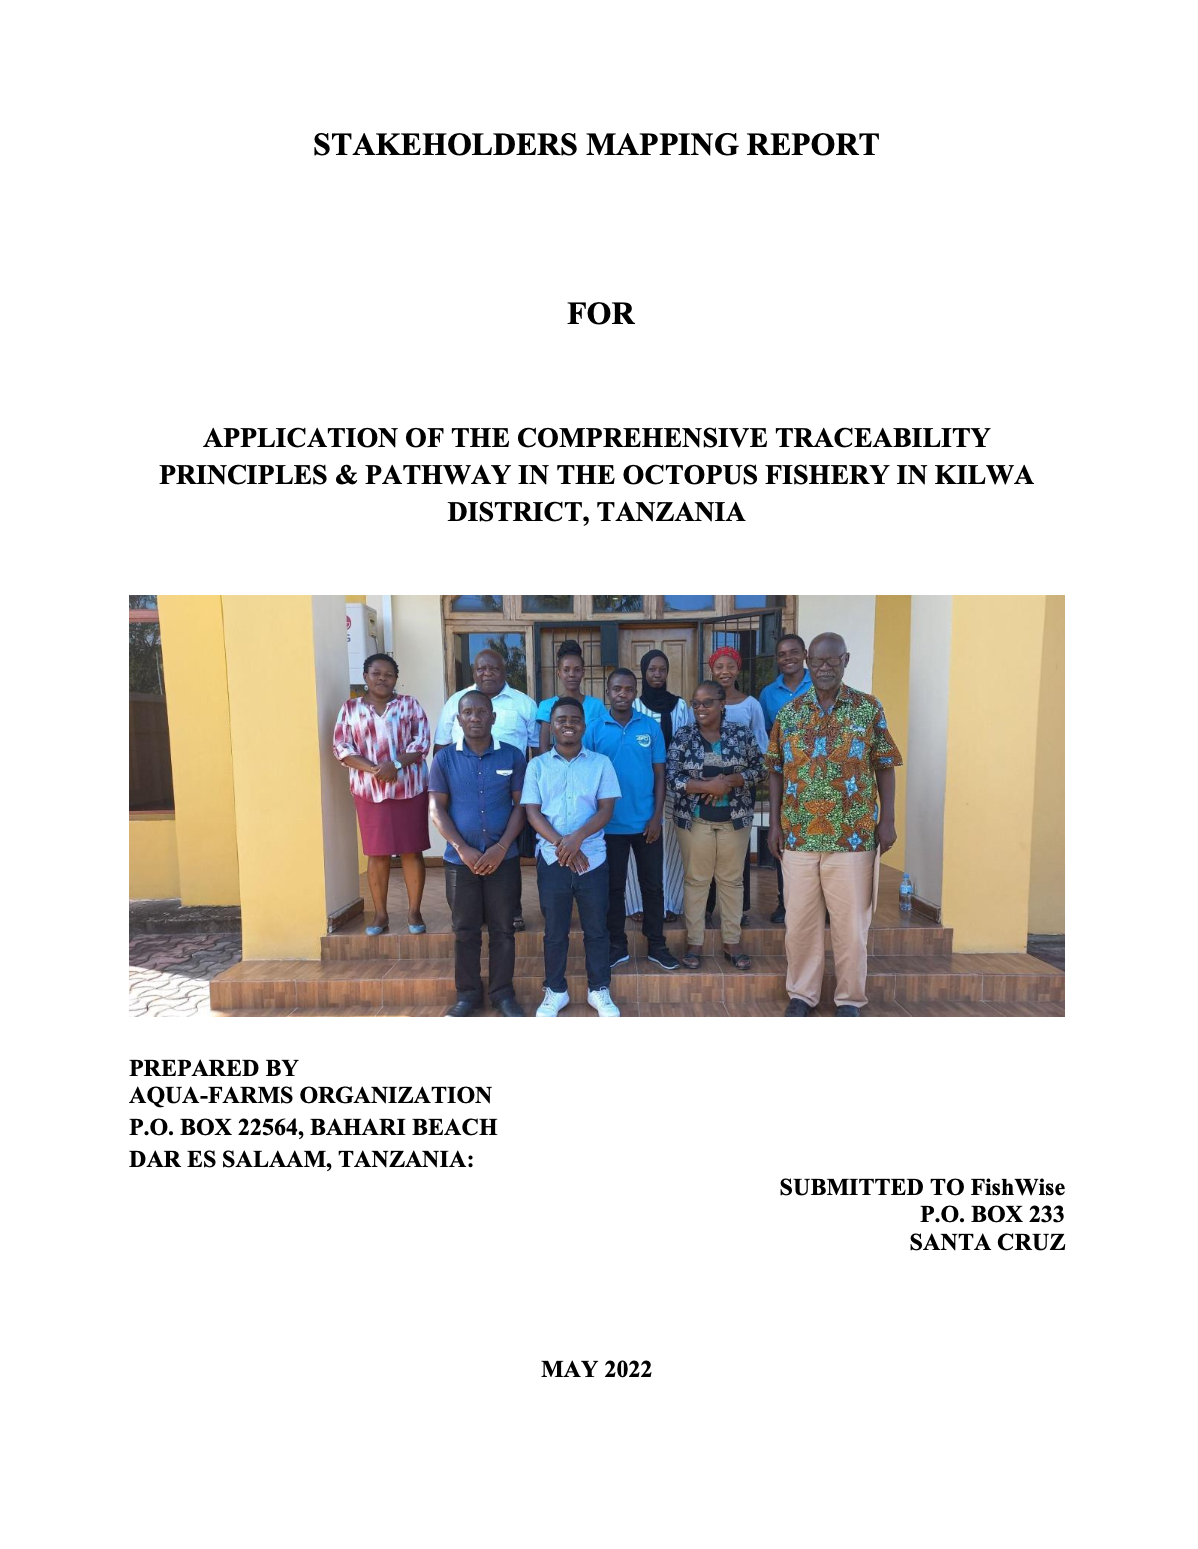 Stakeholders Mapping Report: for the application of the Principles and Pathway in Kilwa District, Tanzania